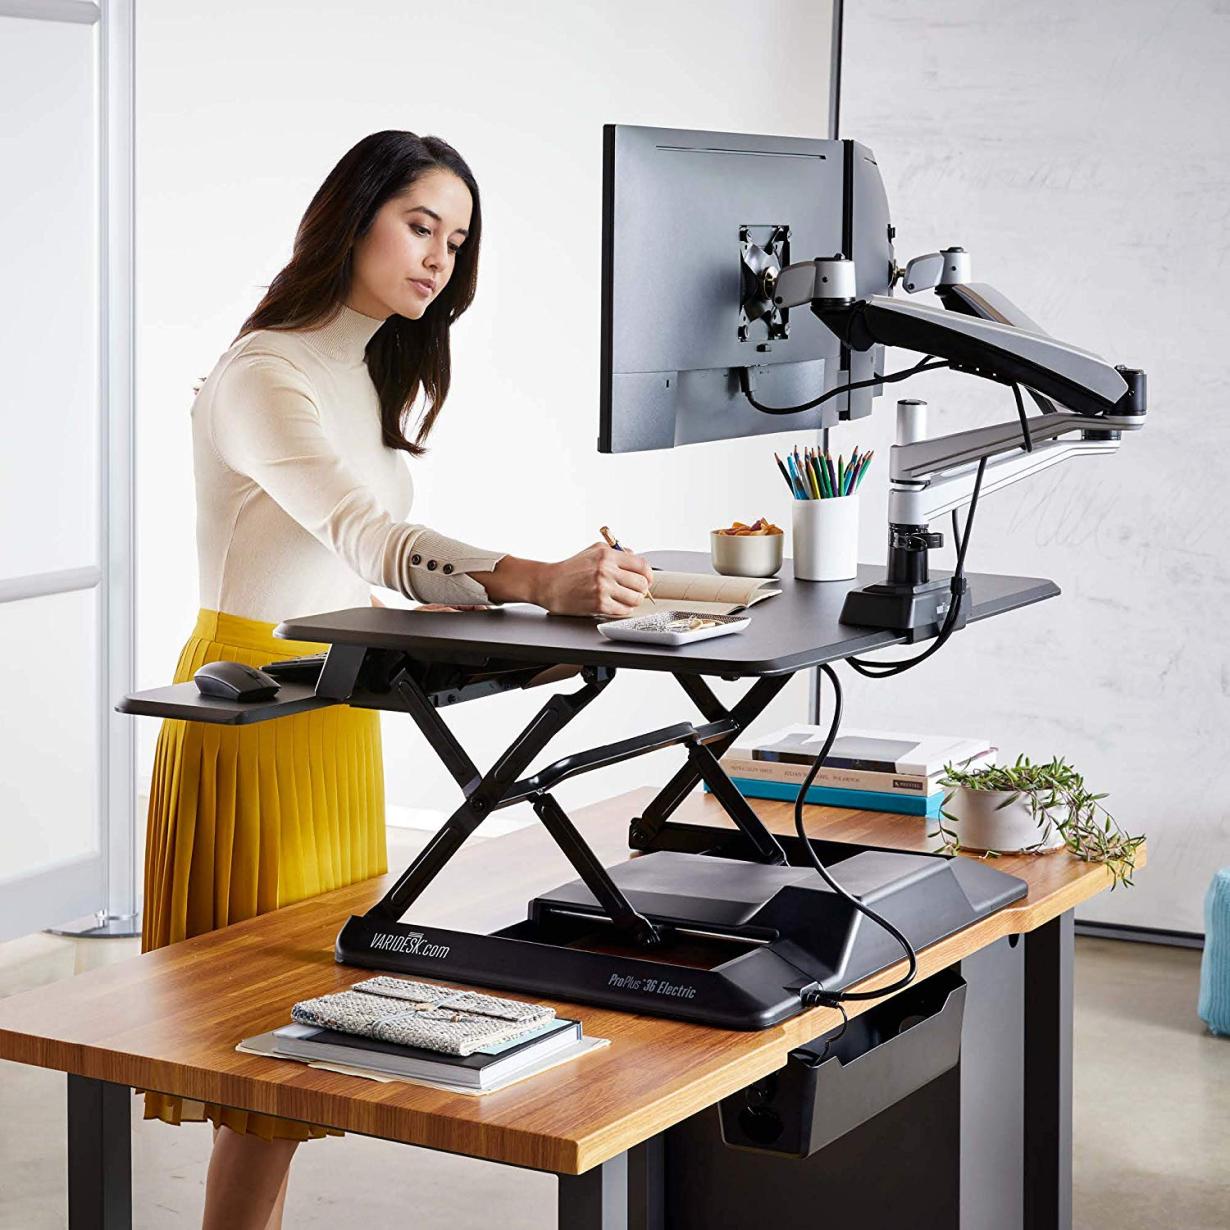 Do Standing Desks Help with Weight Loss?